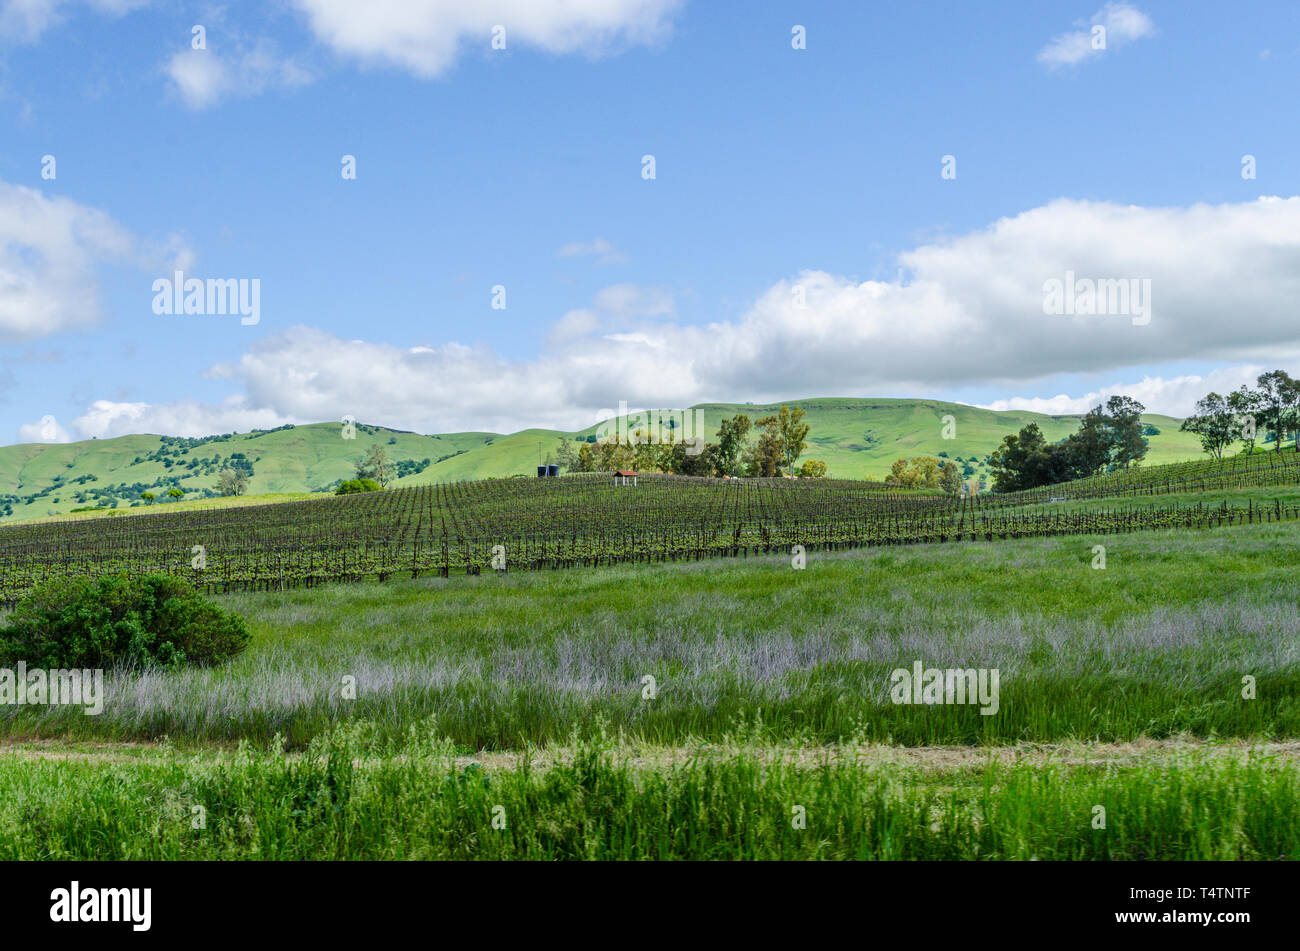 The vines of Capay Valley Vineyards in the Capay Valley of California USA an easy day trip from San Francisco Stock Photo